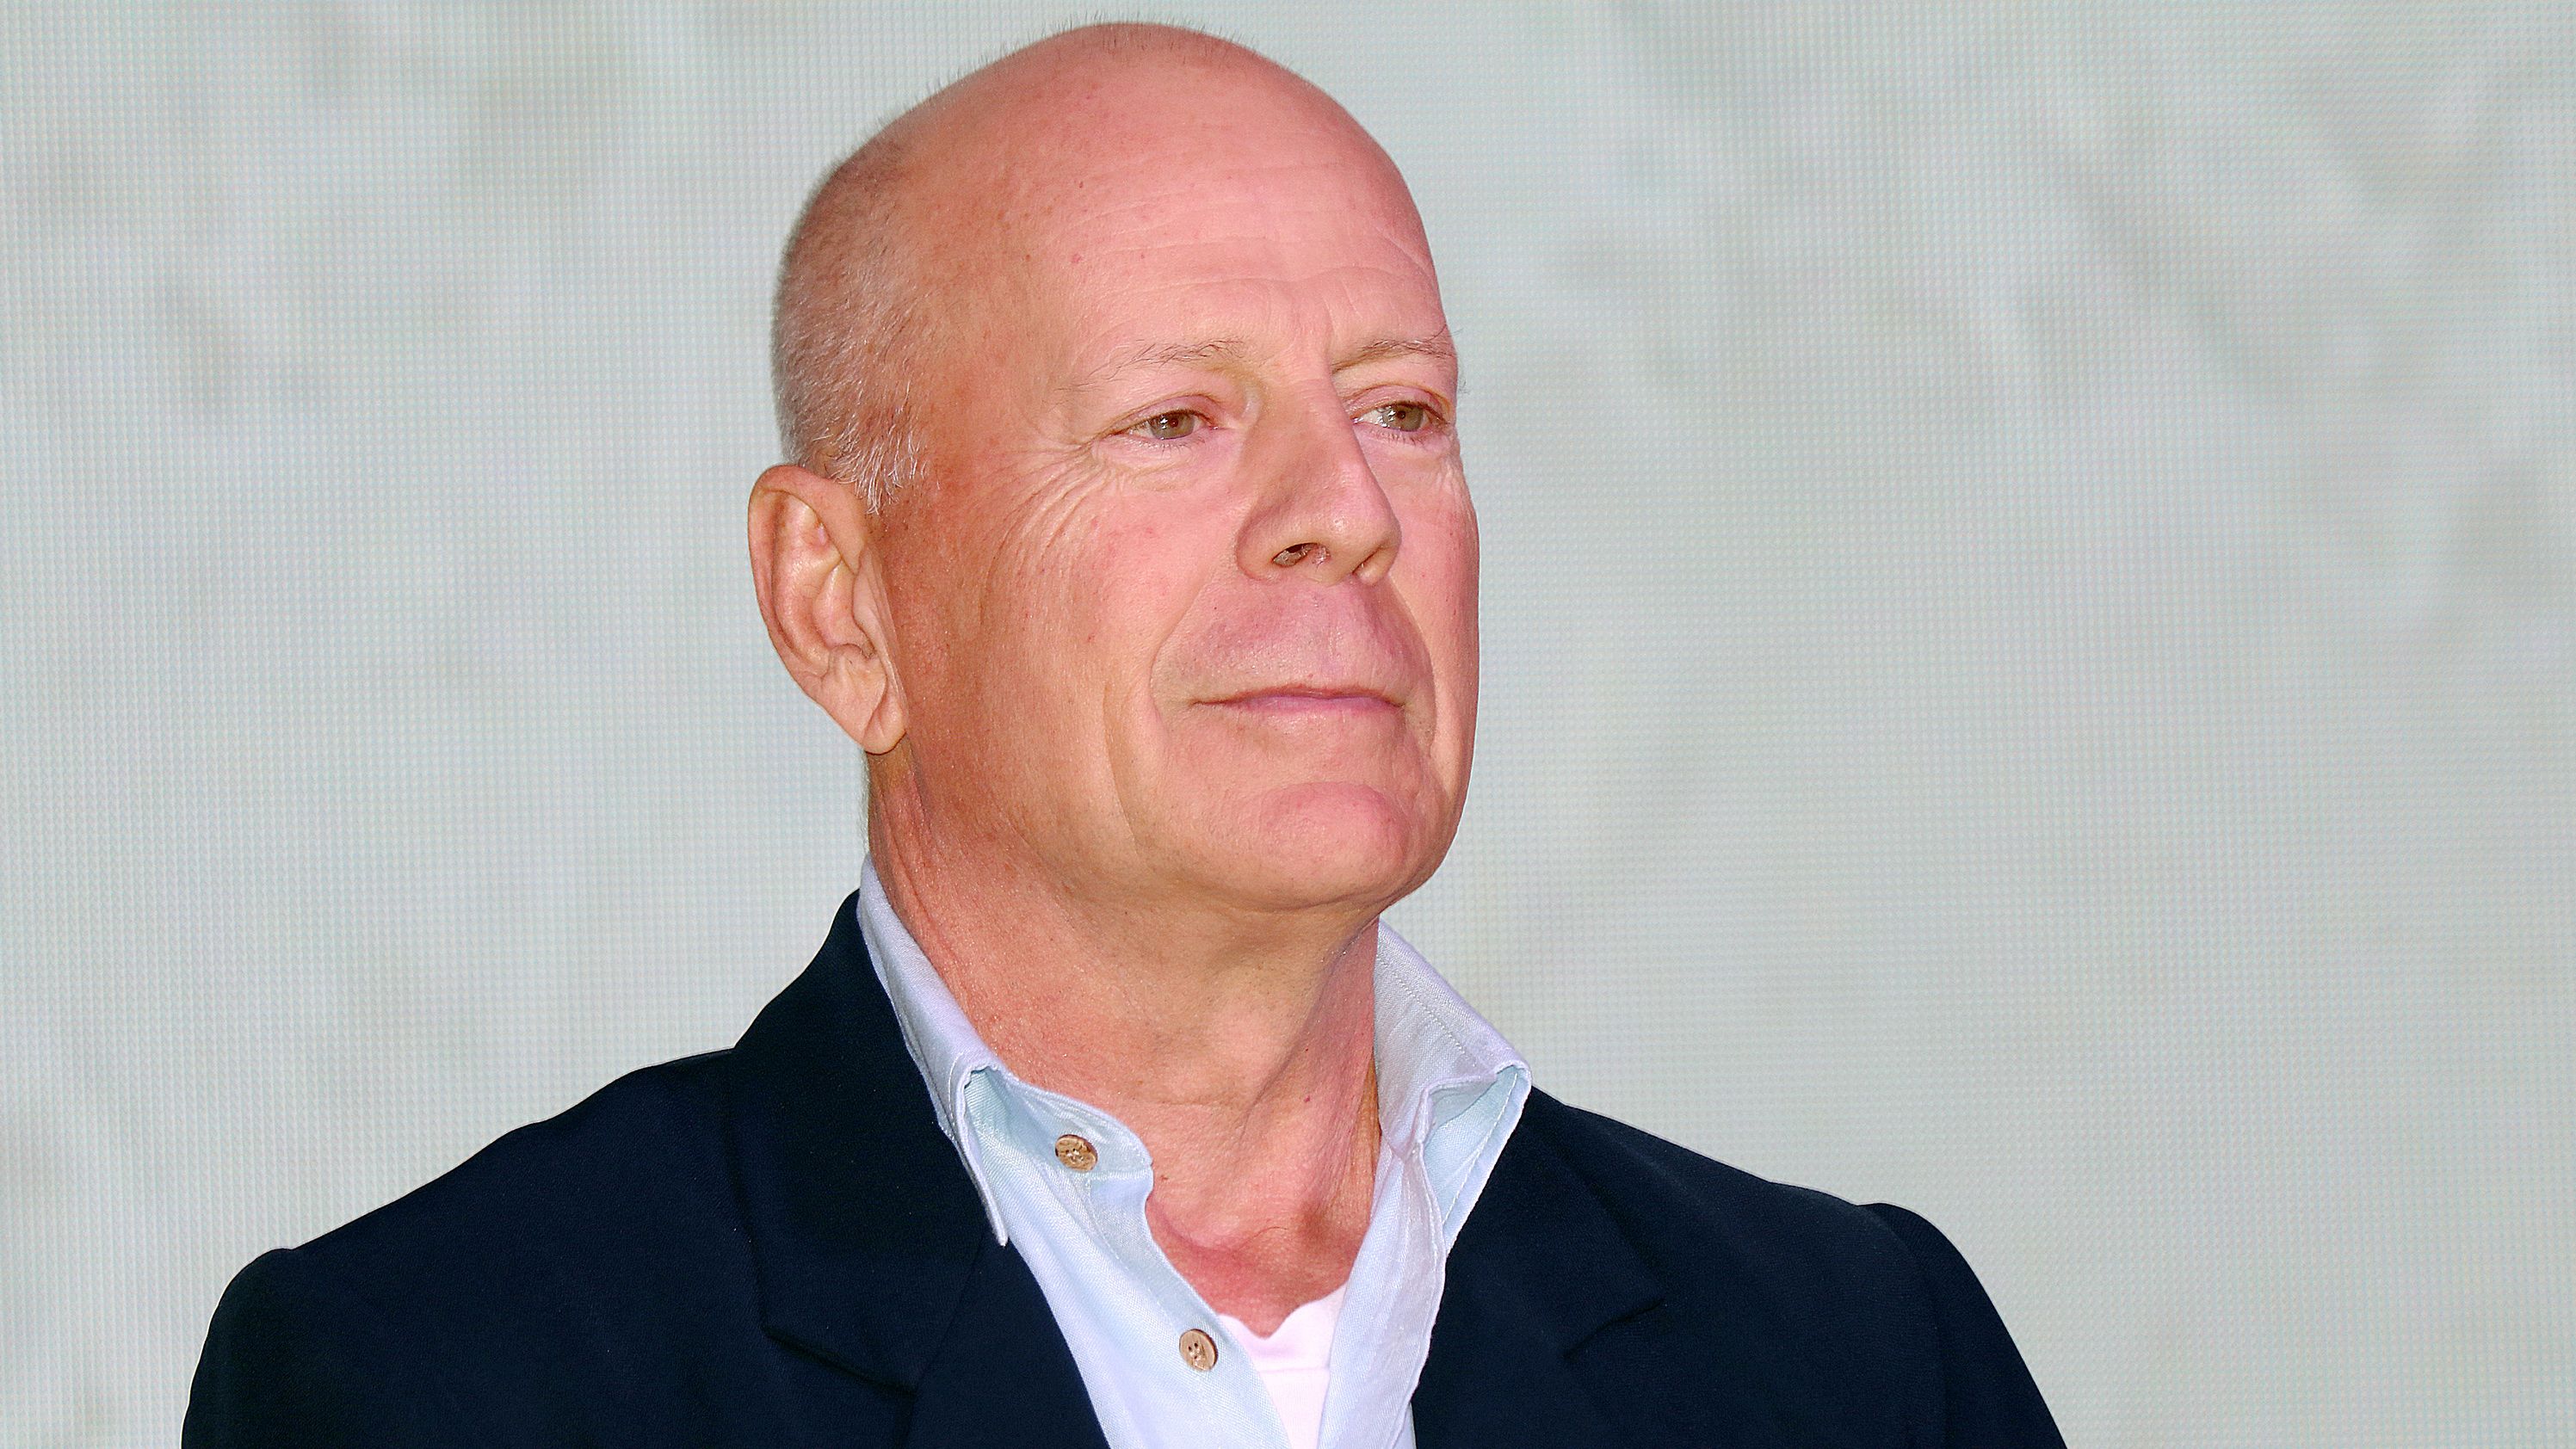 Actor Bruce Willis, shown in 2019, has been diagnosed with the brain disorder aphasia.